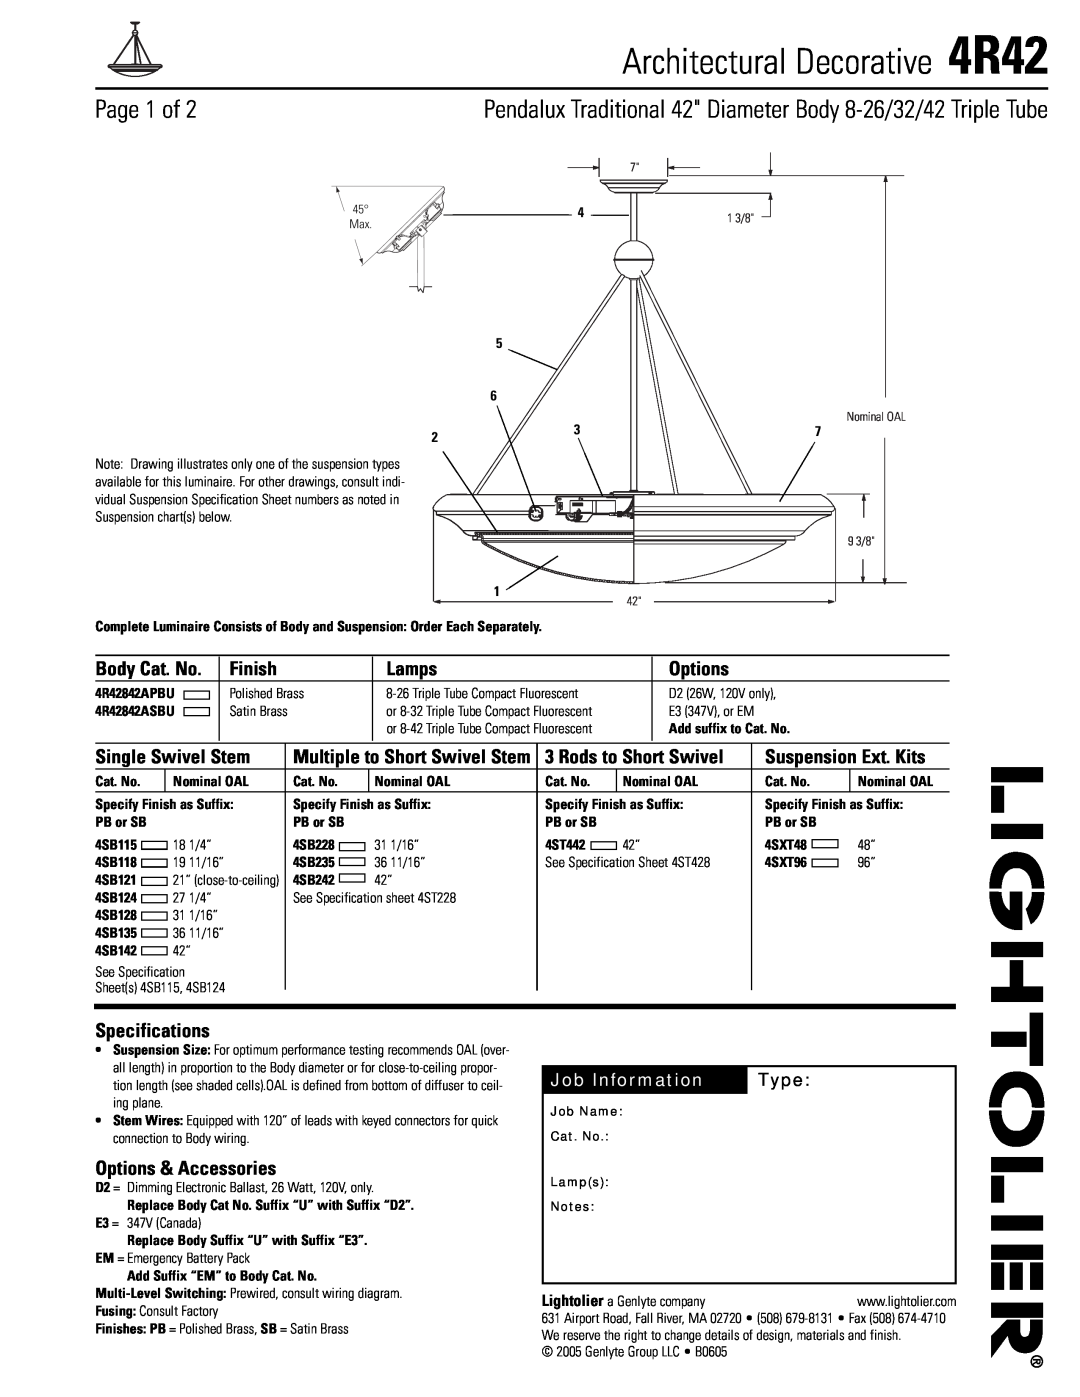 Lightolier specifications Architectural Decorative 4R42, Page 1 of, Finish, Lamps, Options, Single Swivel Stem, Type 